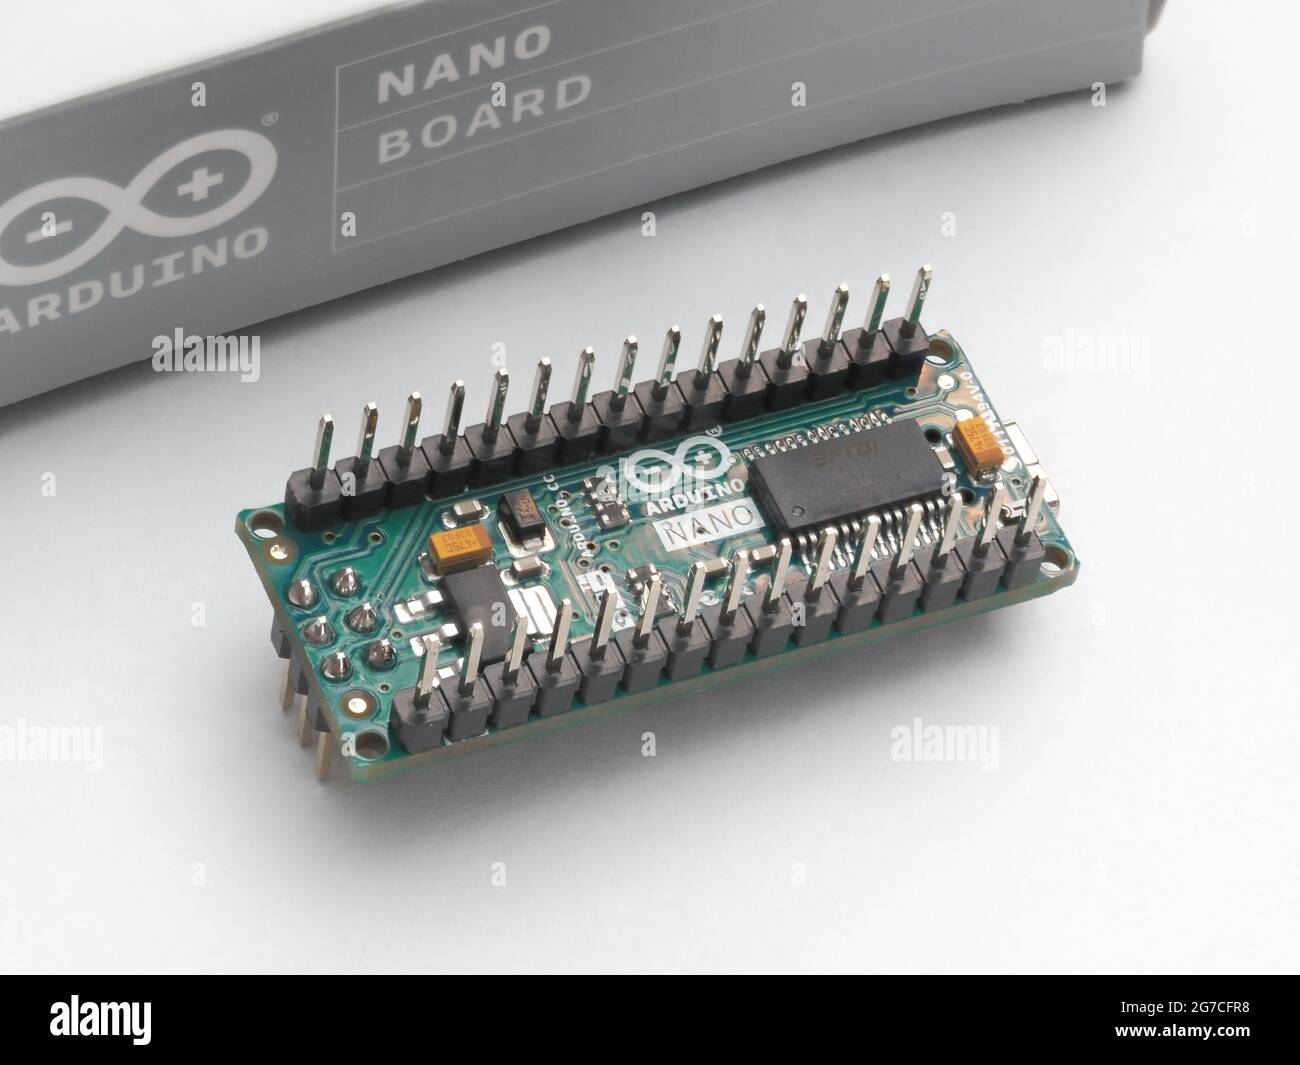 Galati, Romania - July 12, 2021: Original Arduino Nano board for the implementation of electronics and robotics projects. Isolated on white background Stock Photo